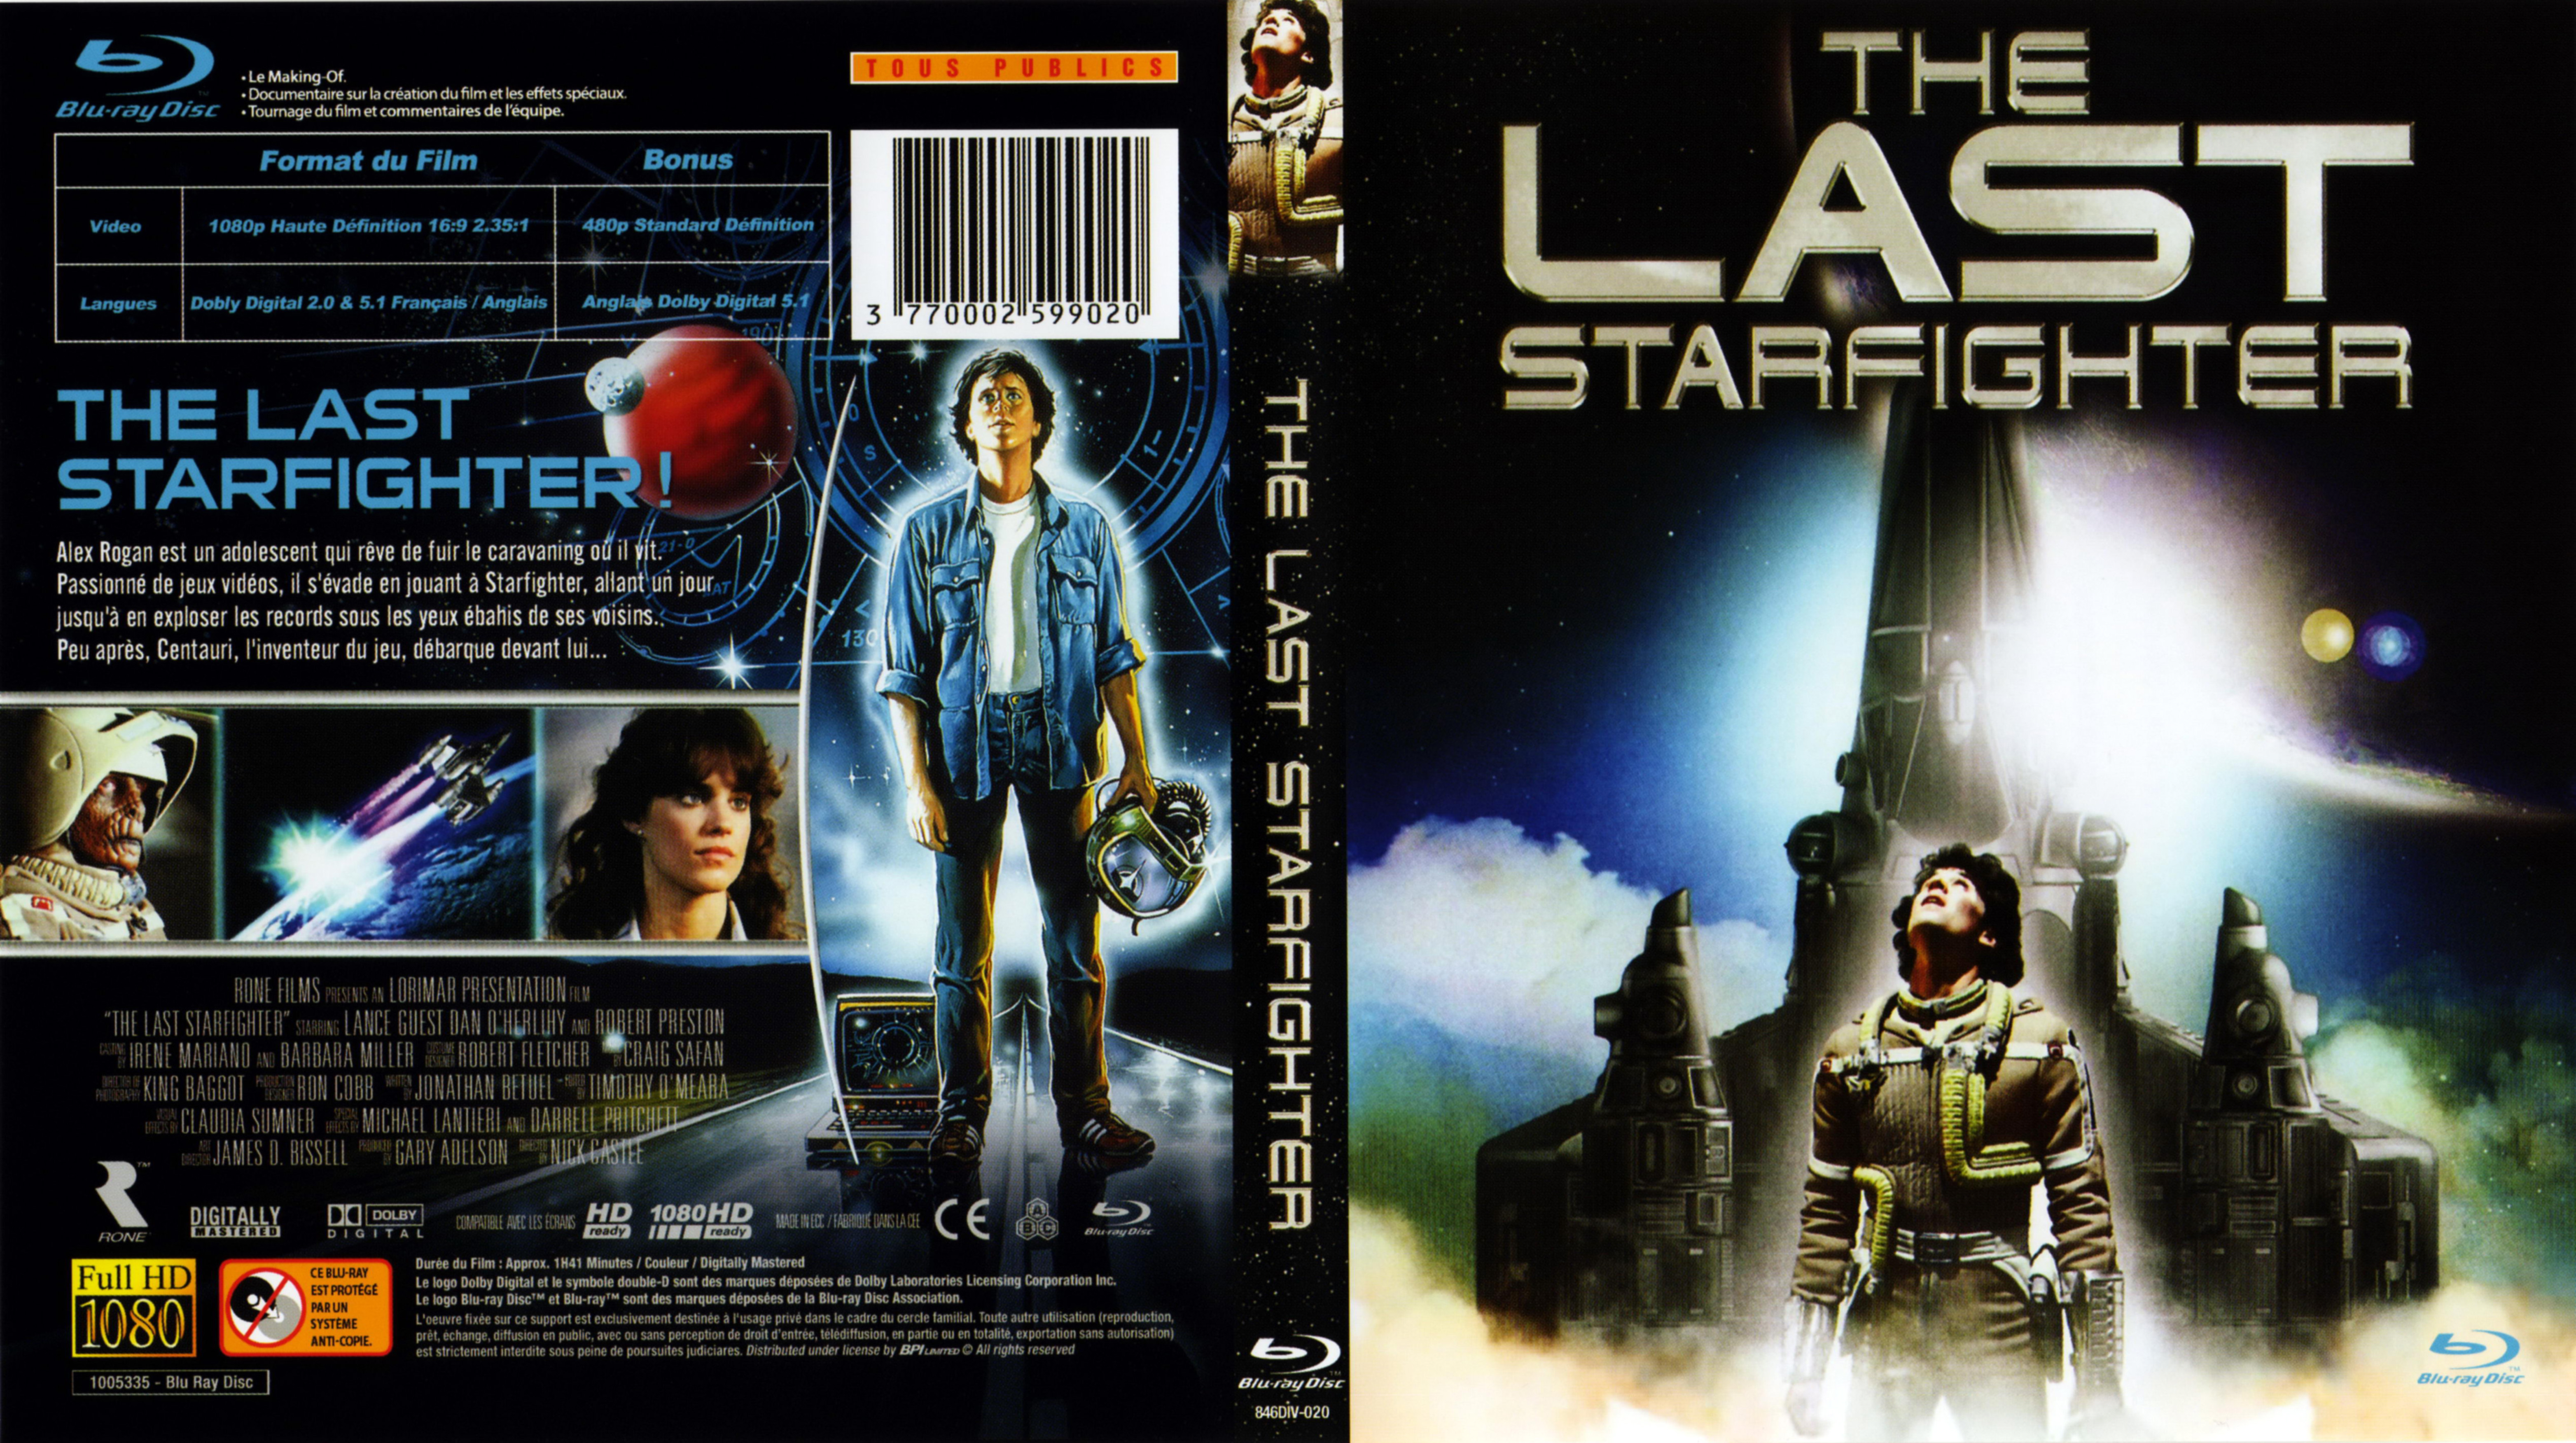 Jaquette DVD The last starfighter (BLU-RAY)